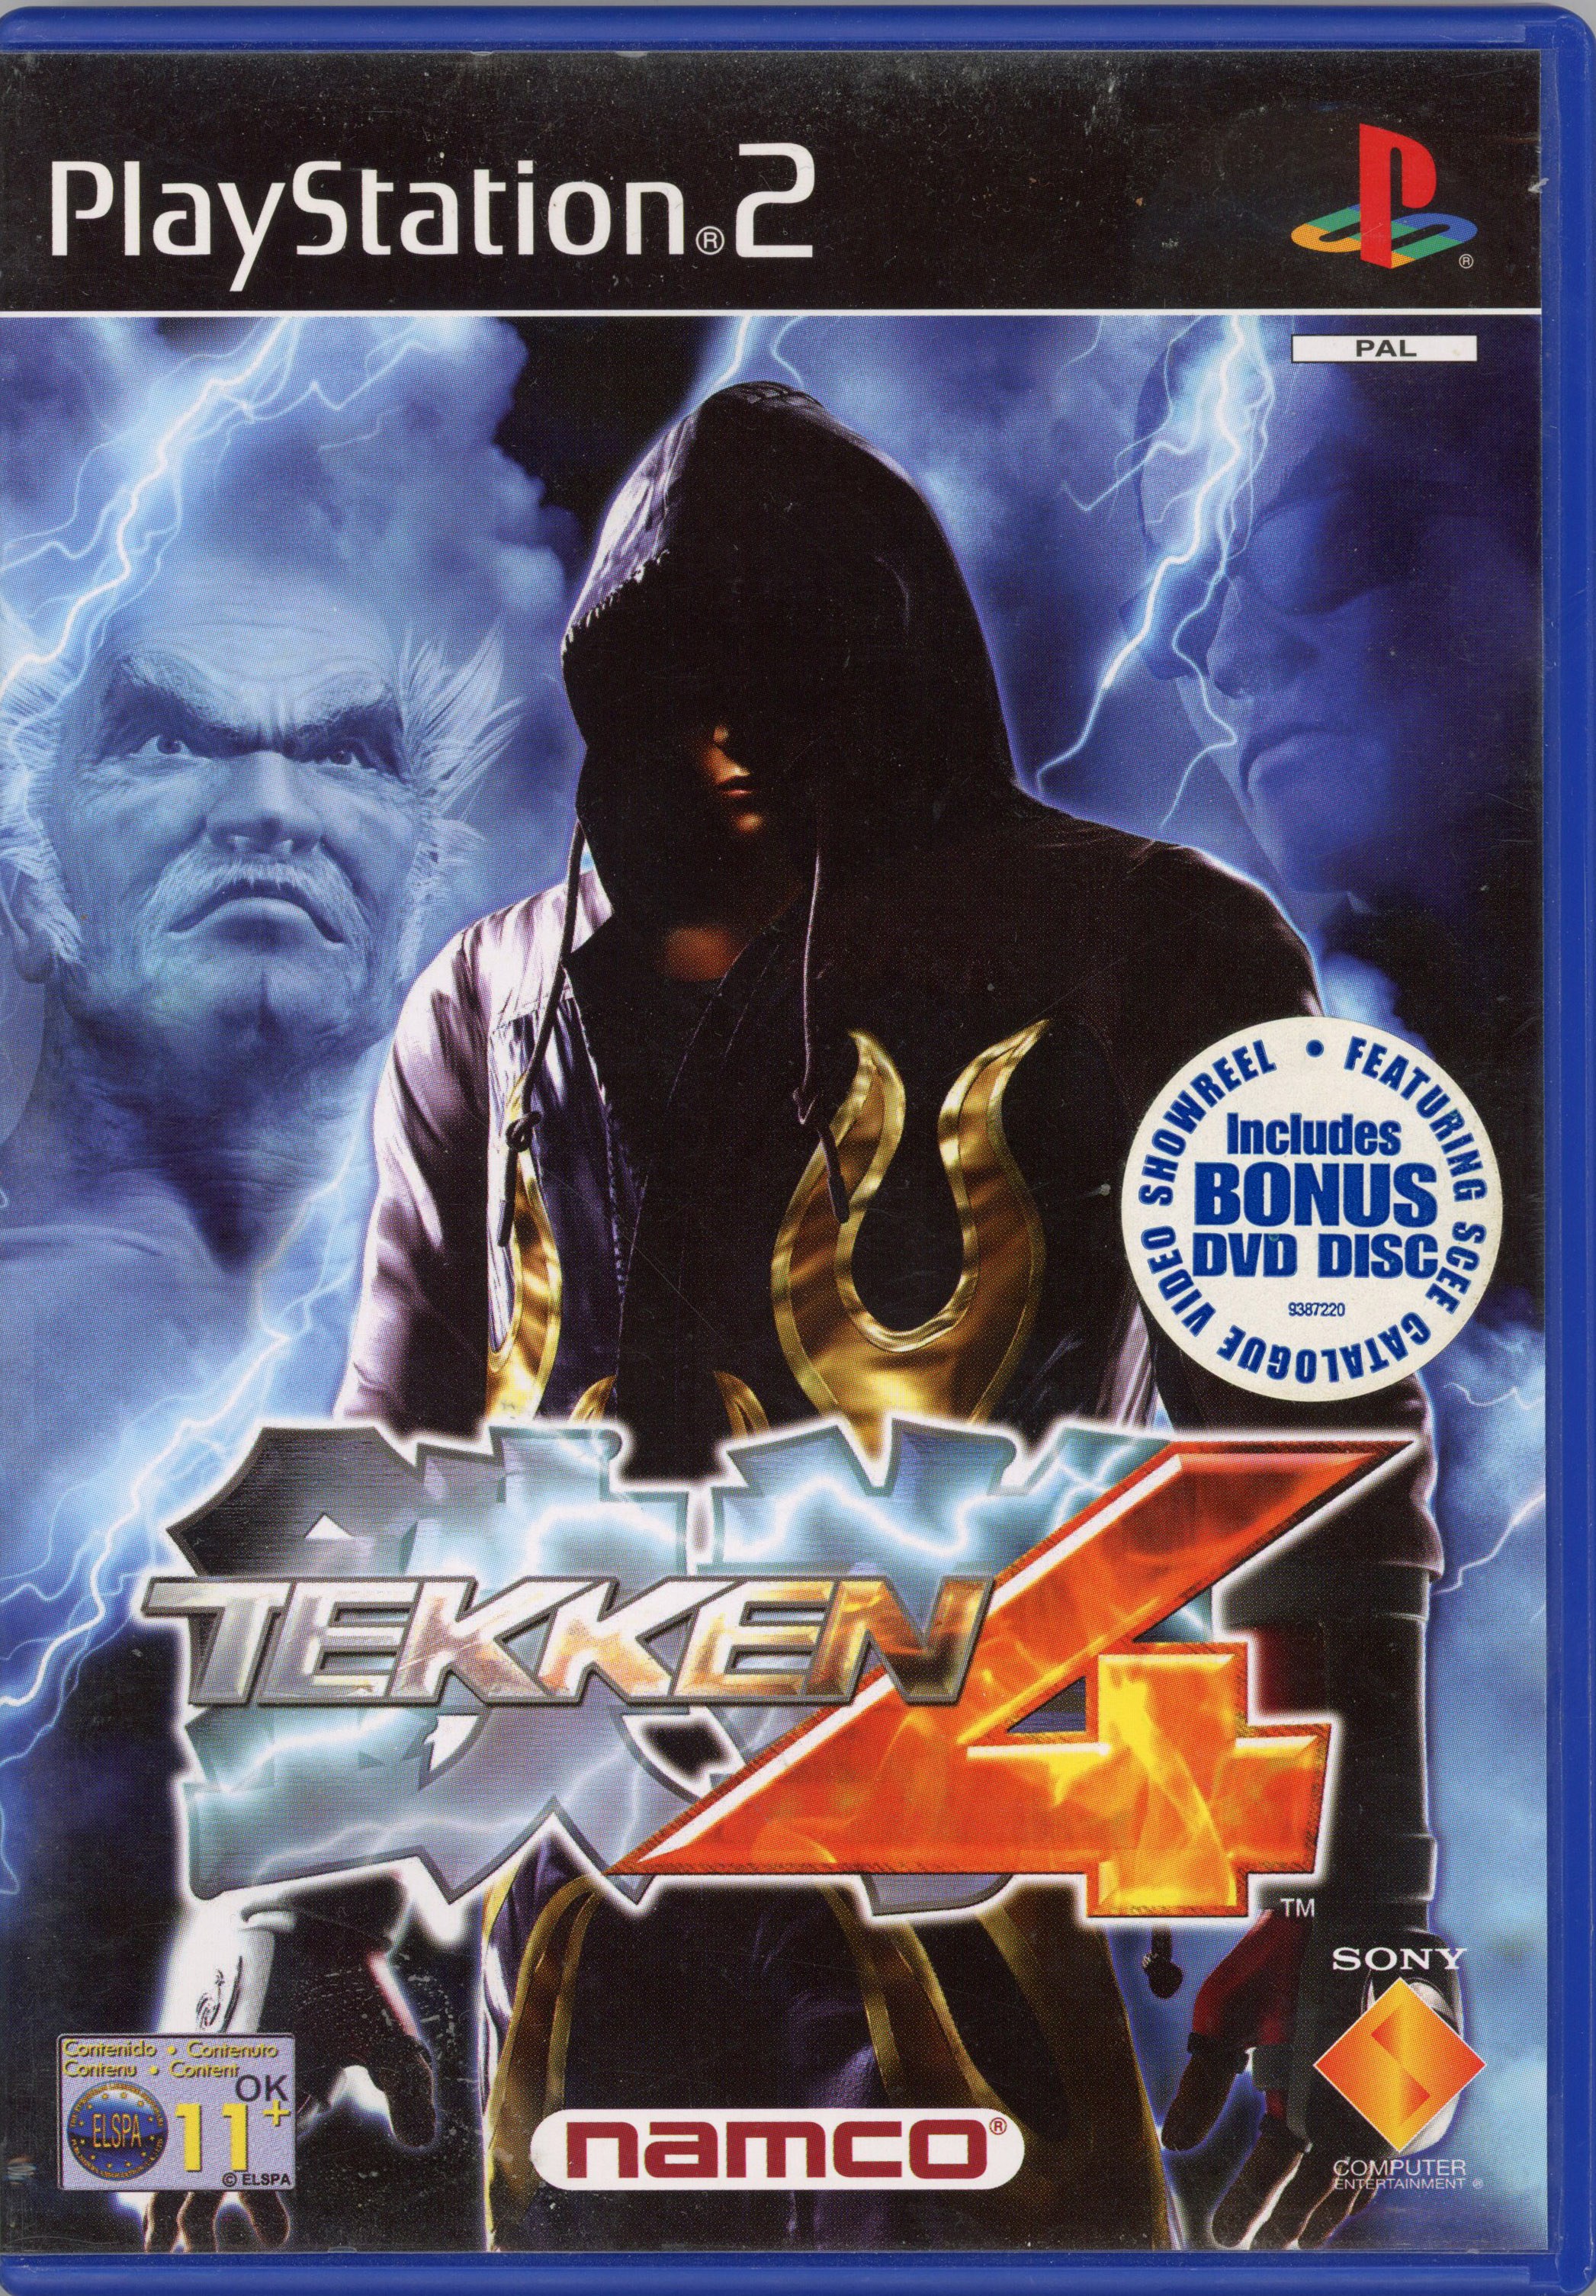 Sony - Fighting Collection - Tekken & Soulcalibur - PlayStation 2 & 3 - Image 3 of 8